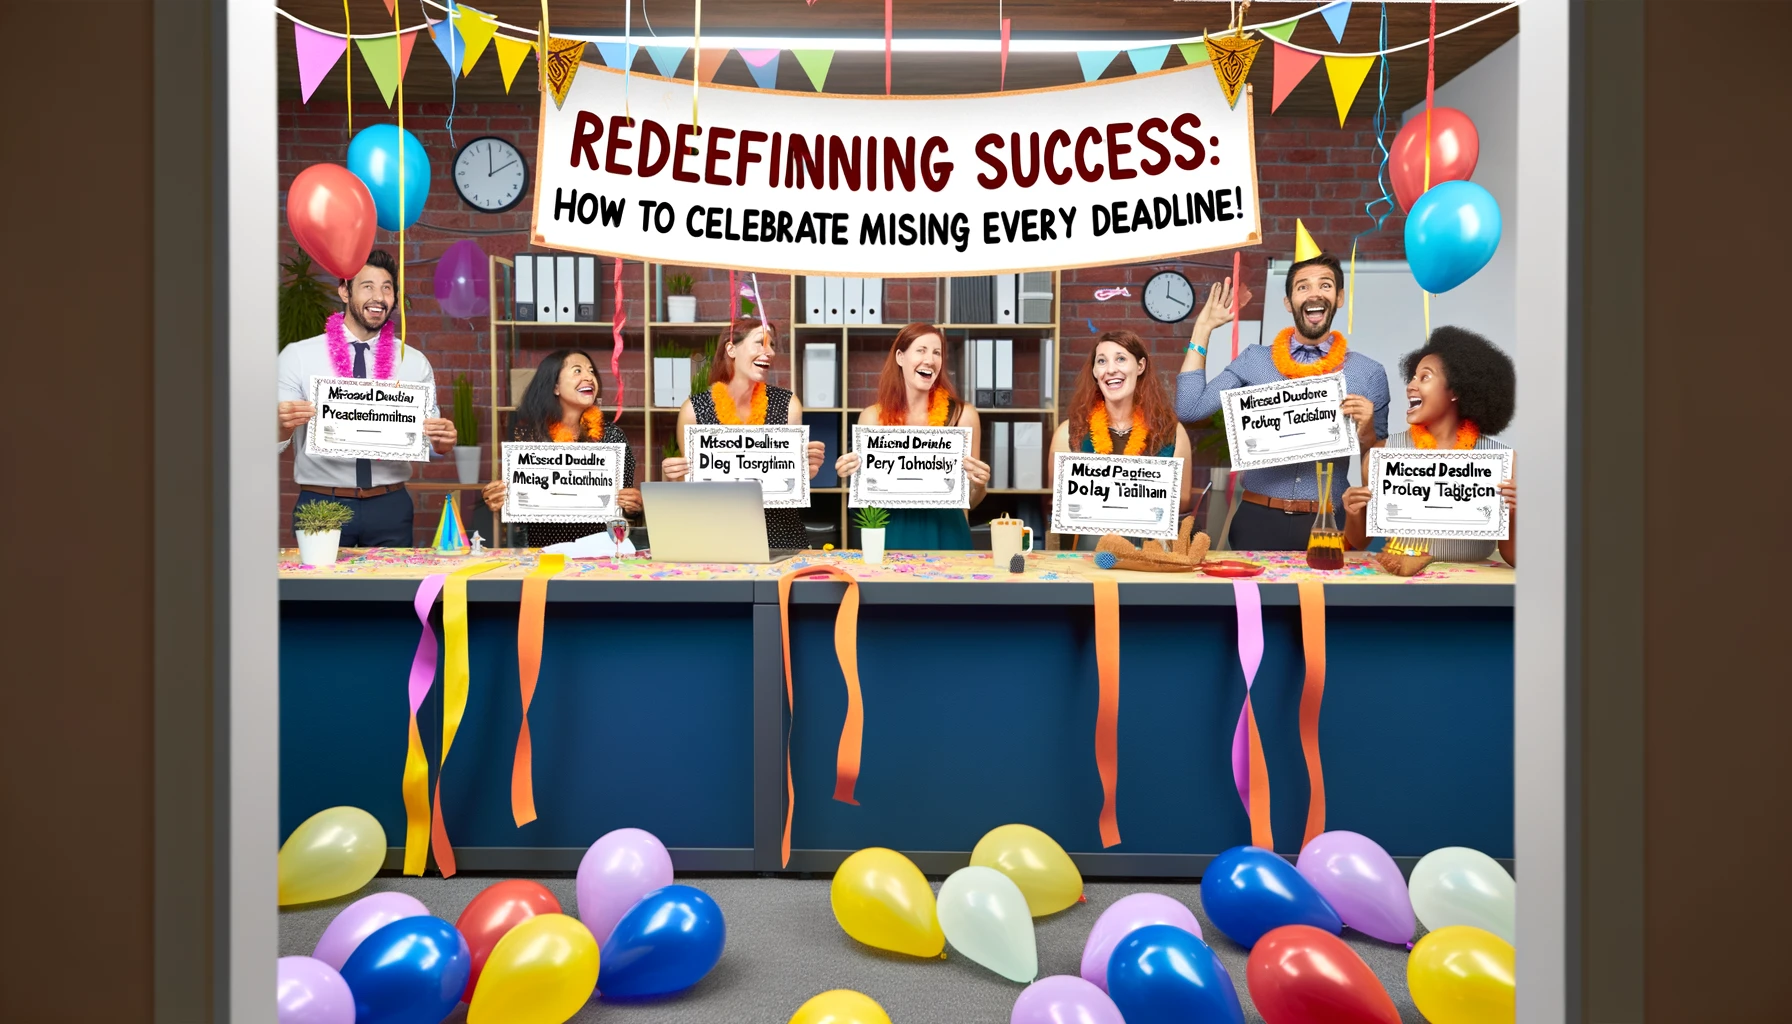 Redefining Success: How to Celebrate Missing Every Deadline